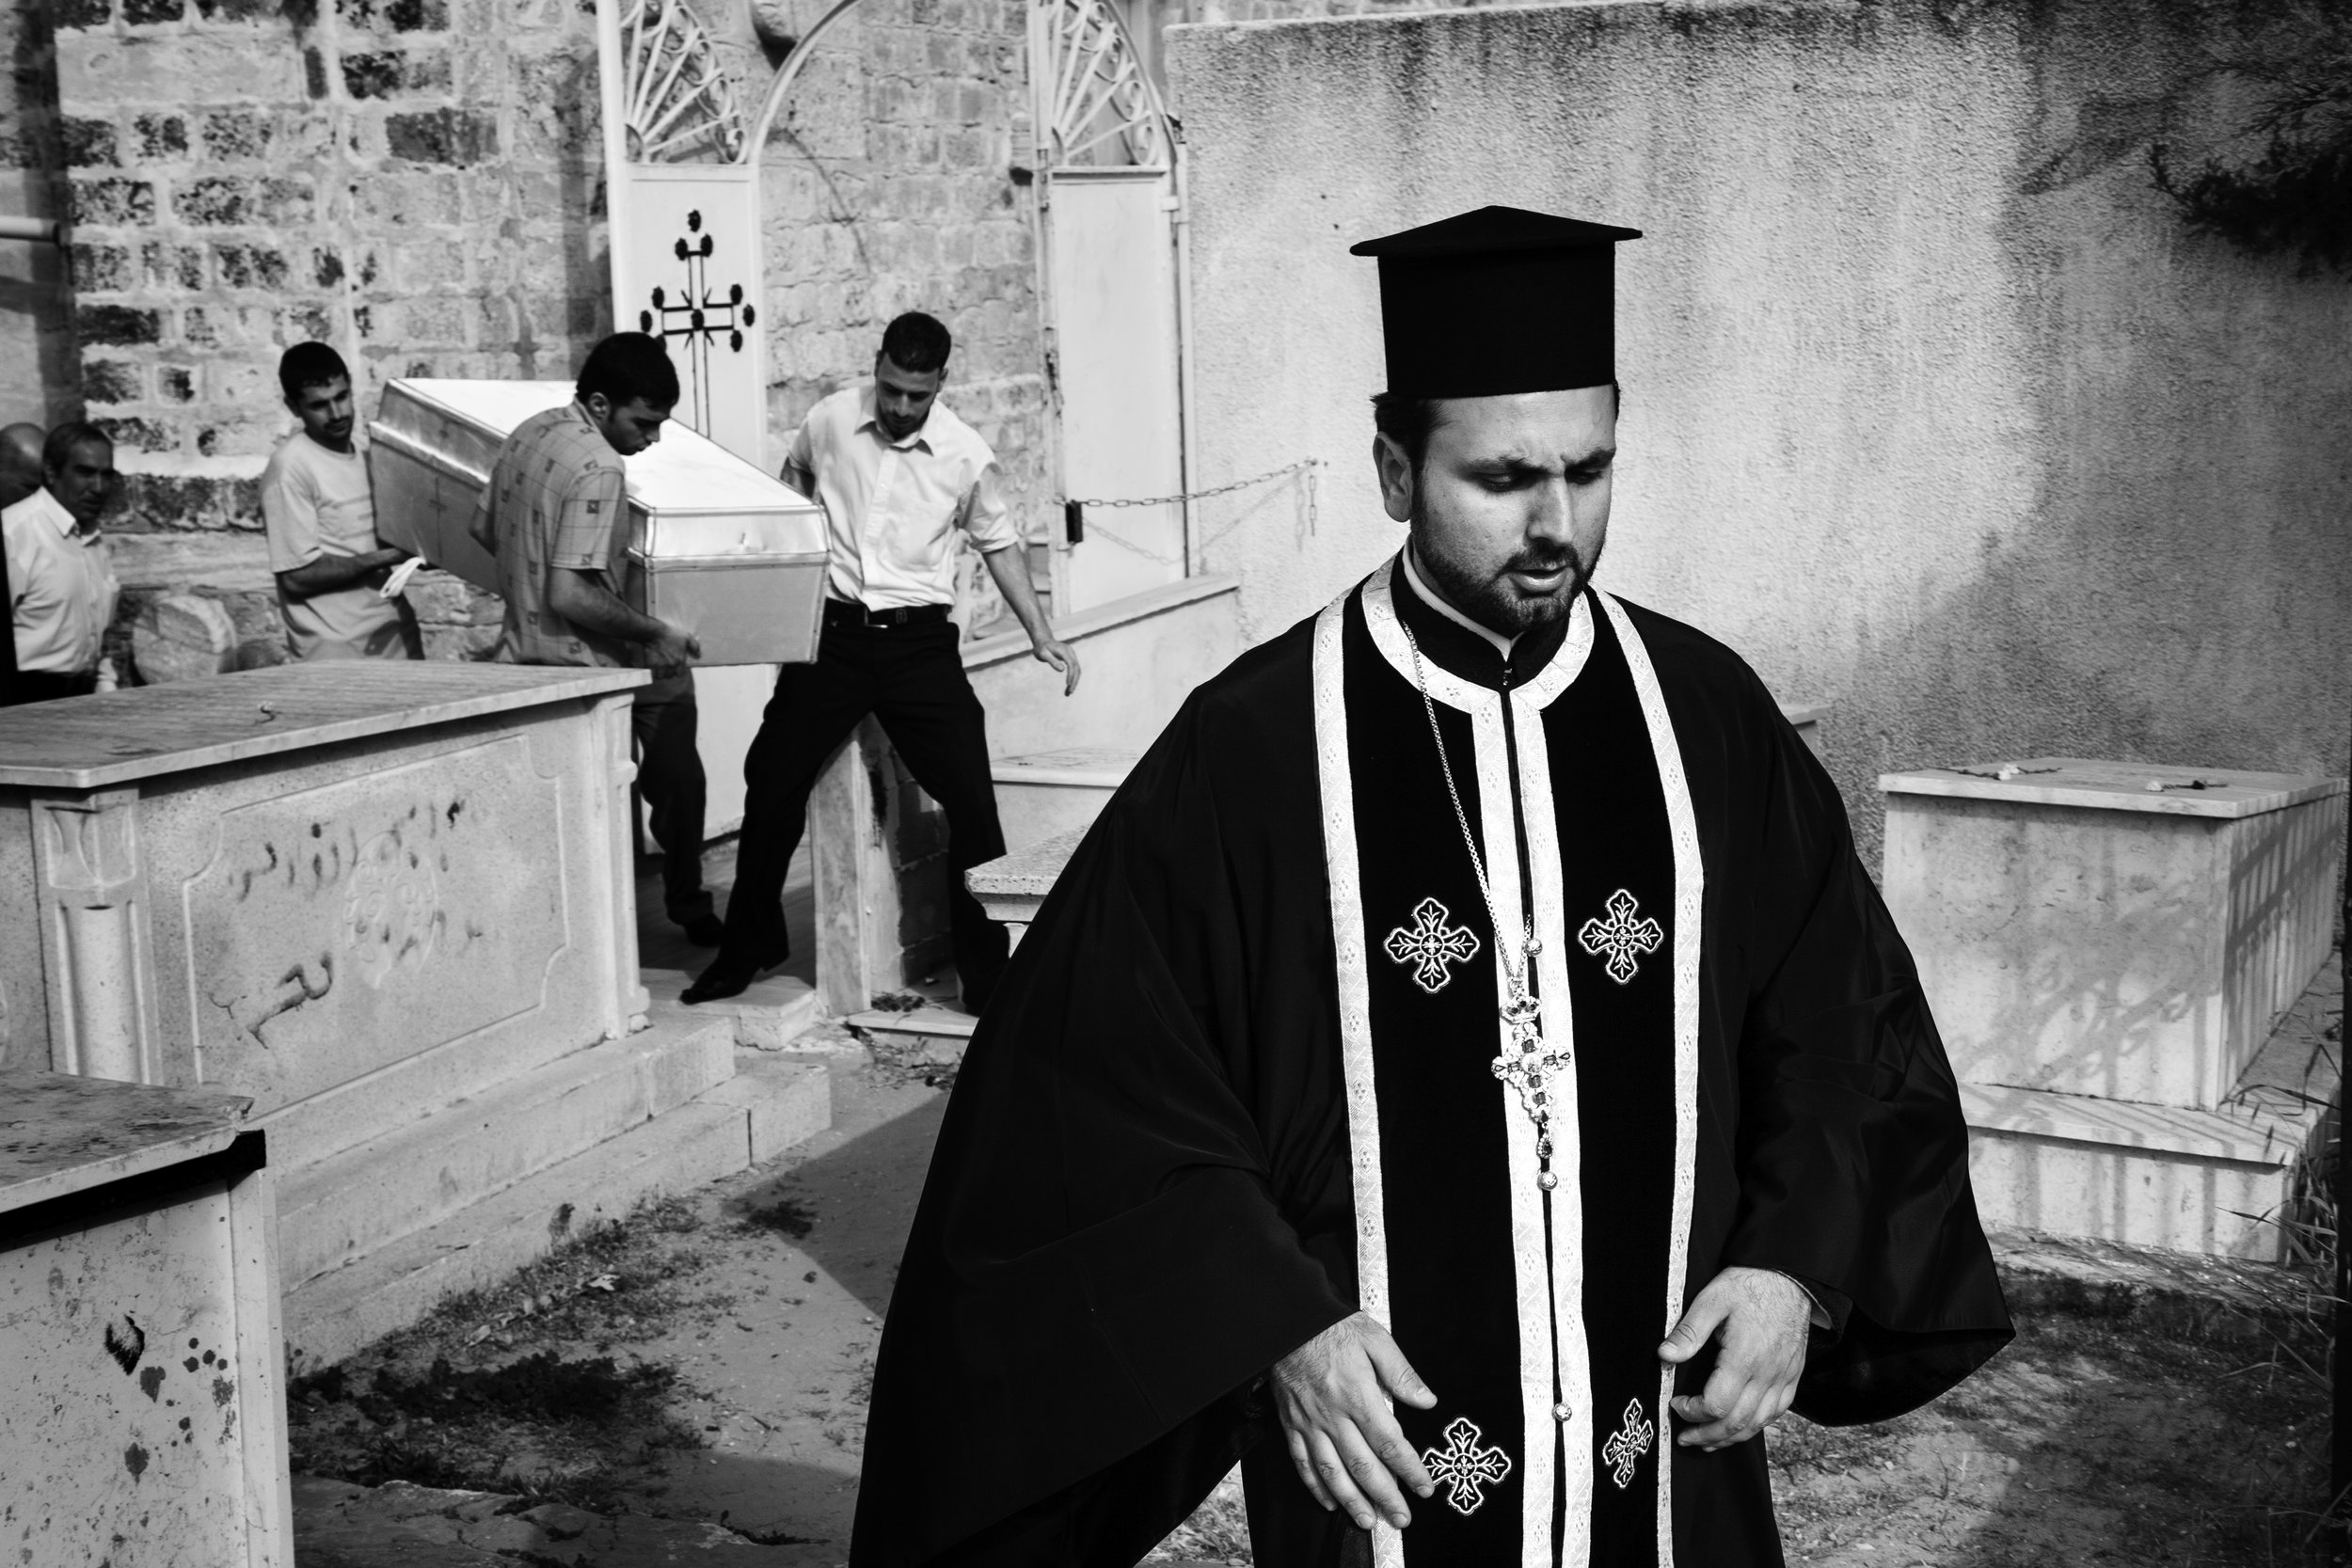  The funeral of 95 year-old Om Saleem takes place at the fifth-century Greek Orthodox Church of St. Porphyrious in Gaza City, Gaza, Palestine, on March 25, 2008.  